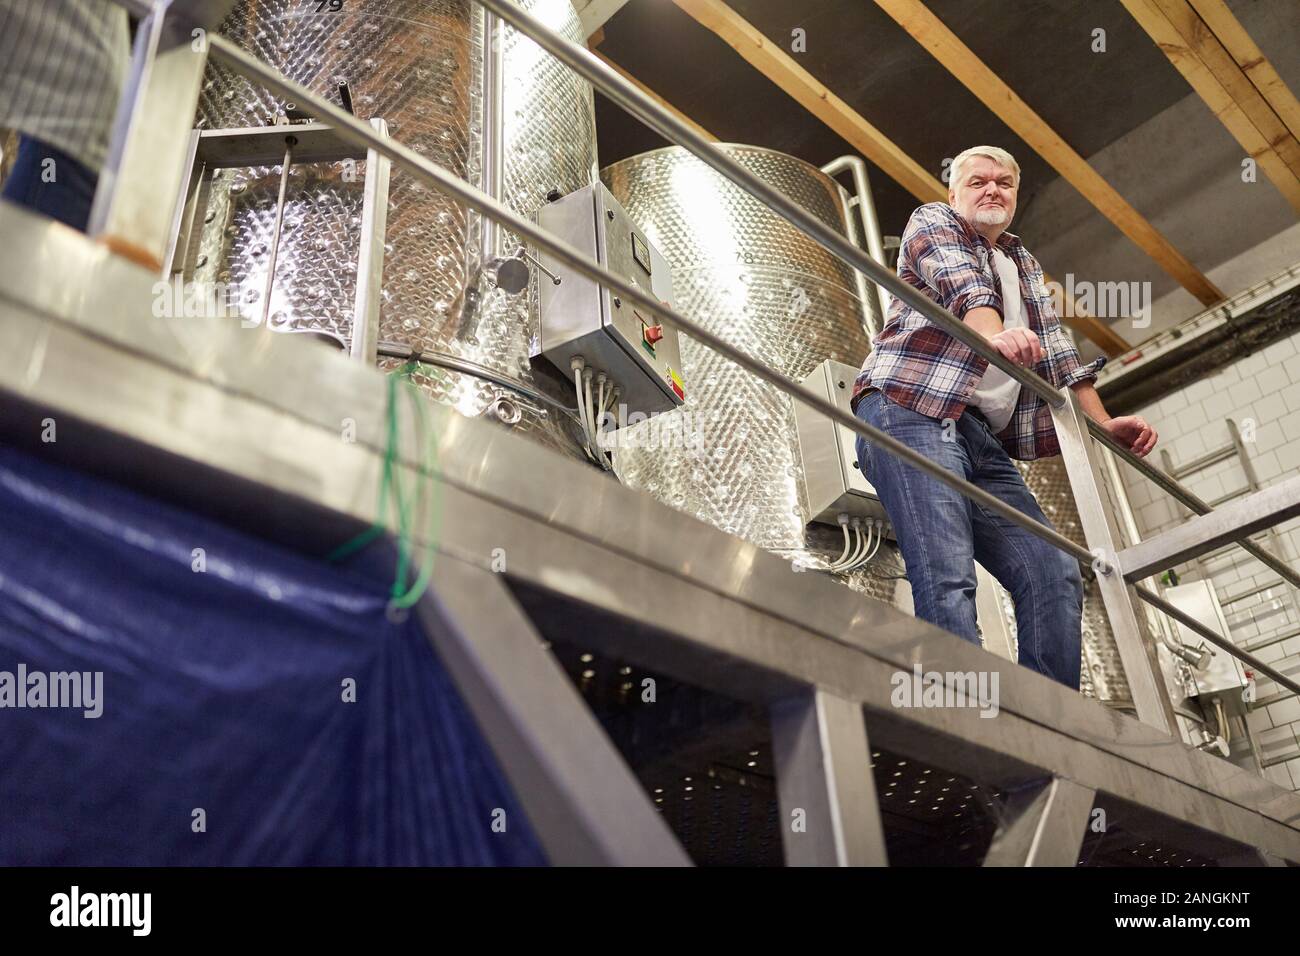 Older winemaker as master winemaker monitors vinification in front of a fermentation tank Stock Photo